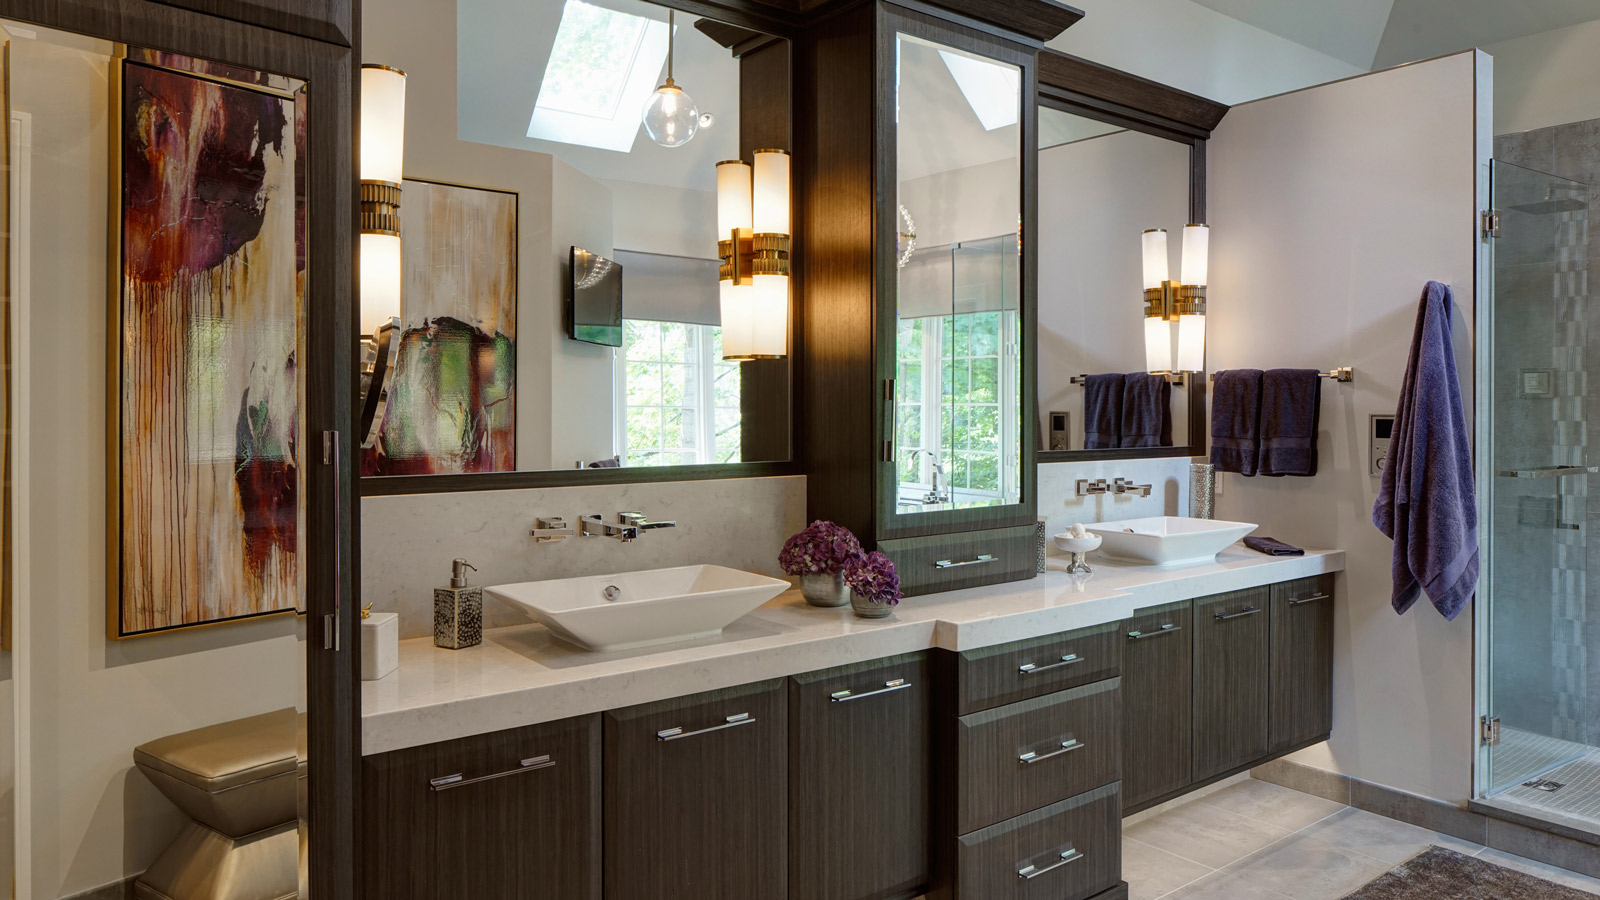 From-Small-Bathroom-to-Luxurious-Master-Suite-Design-drury-design